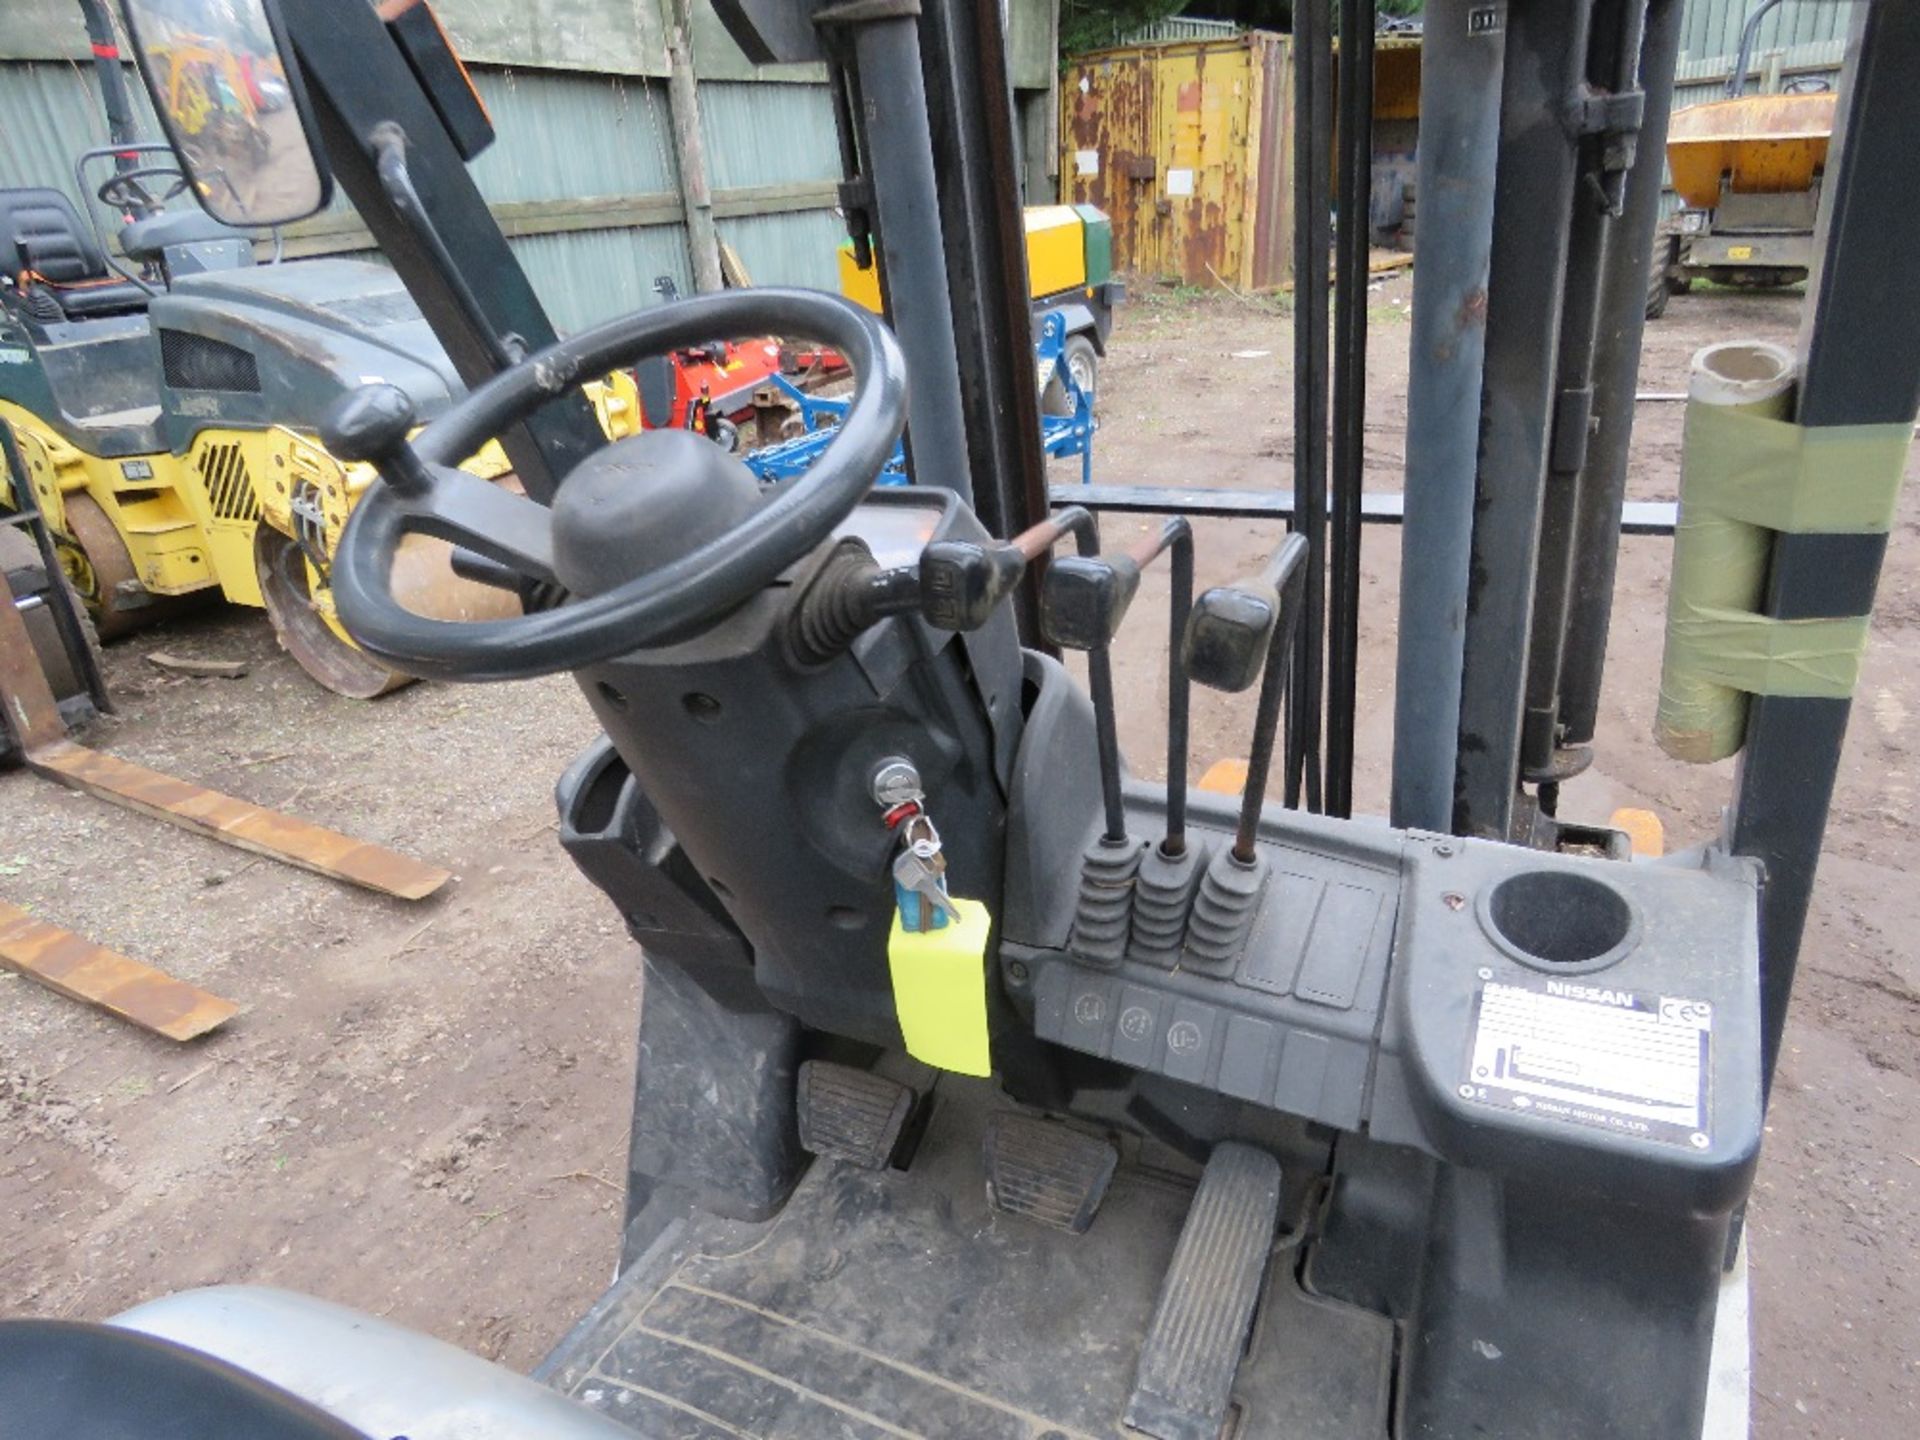 NISSAN 1.5TONNE CAPACITY GAS POWERED FORKLIFT TRUCK SN:L01-000622, 3260 REC HOURS. LOW MAST HEIGHT. - Image 6 of 10